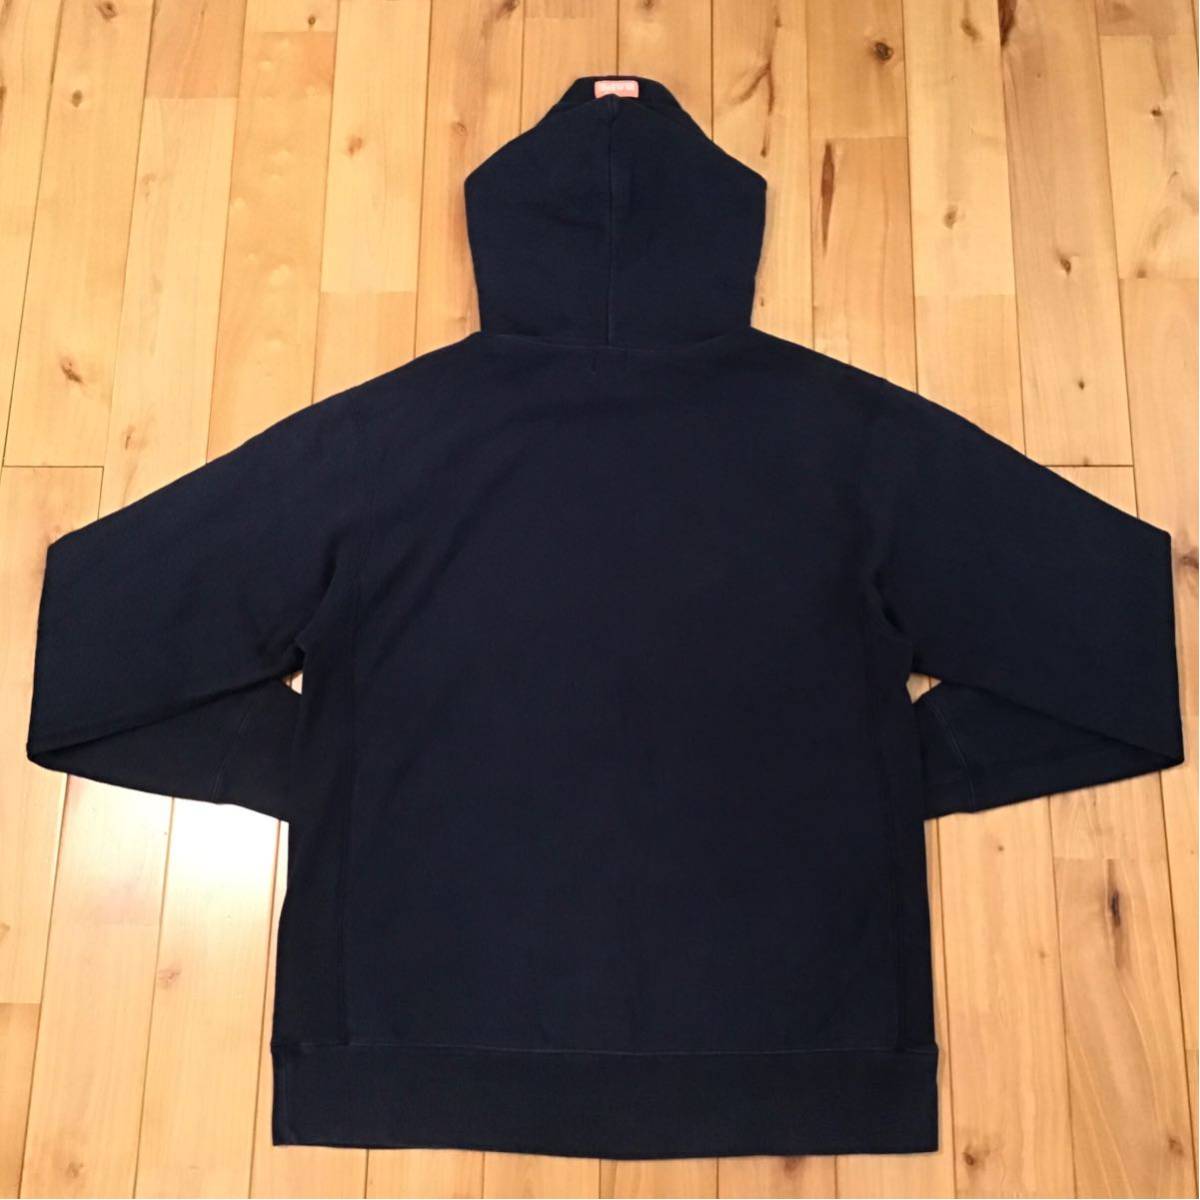 * the first period * Mad face pull over Parker M size navy a bathing ape Ape Bape A Bathing Ape bape pullover hoodie t71